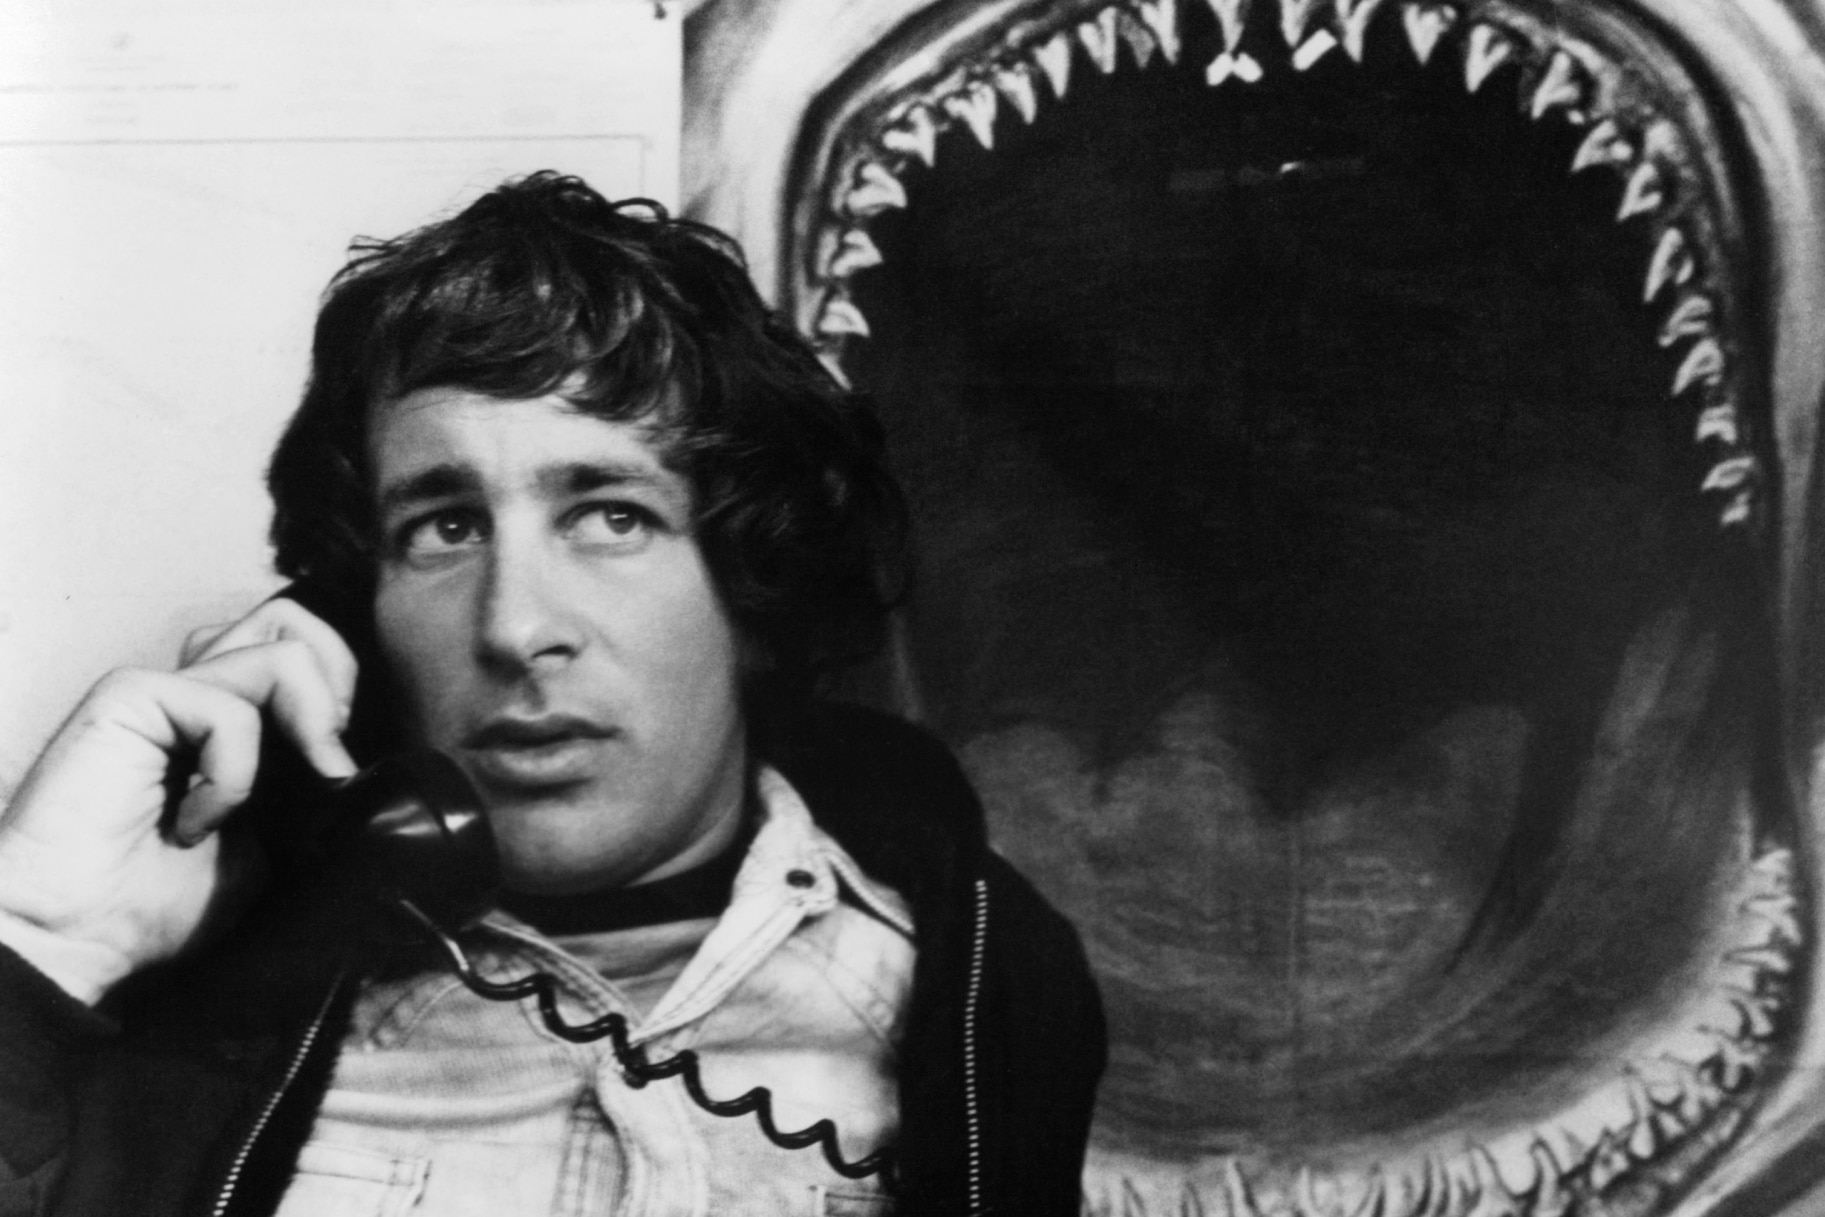 Steven Spielberg ‘truly’ regrets demonization of sharks and harmful sport fishing caused by ‘Jaws’